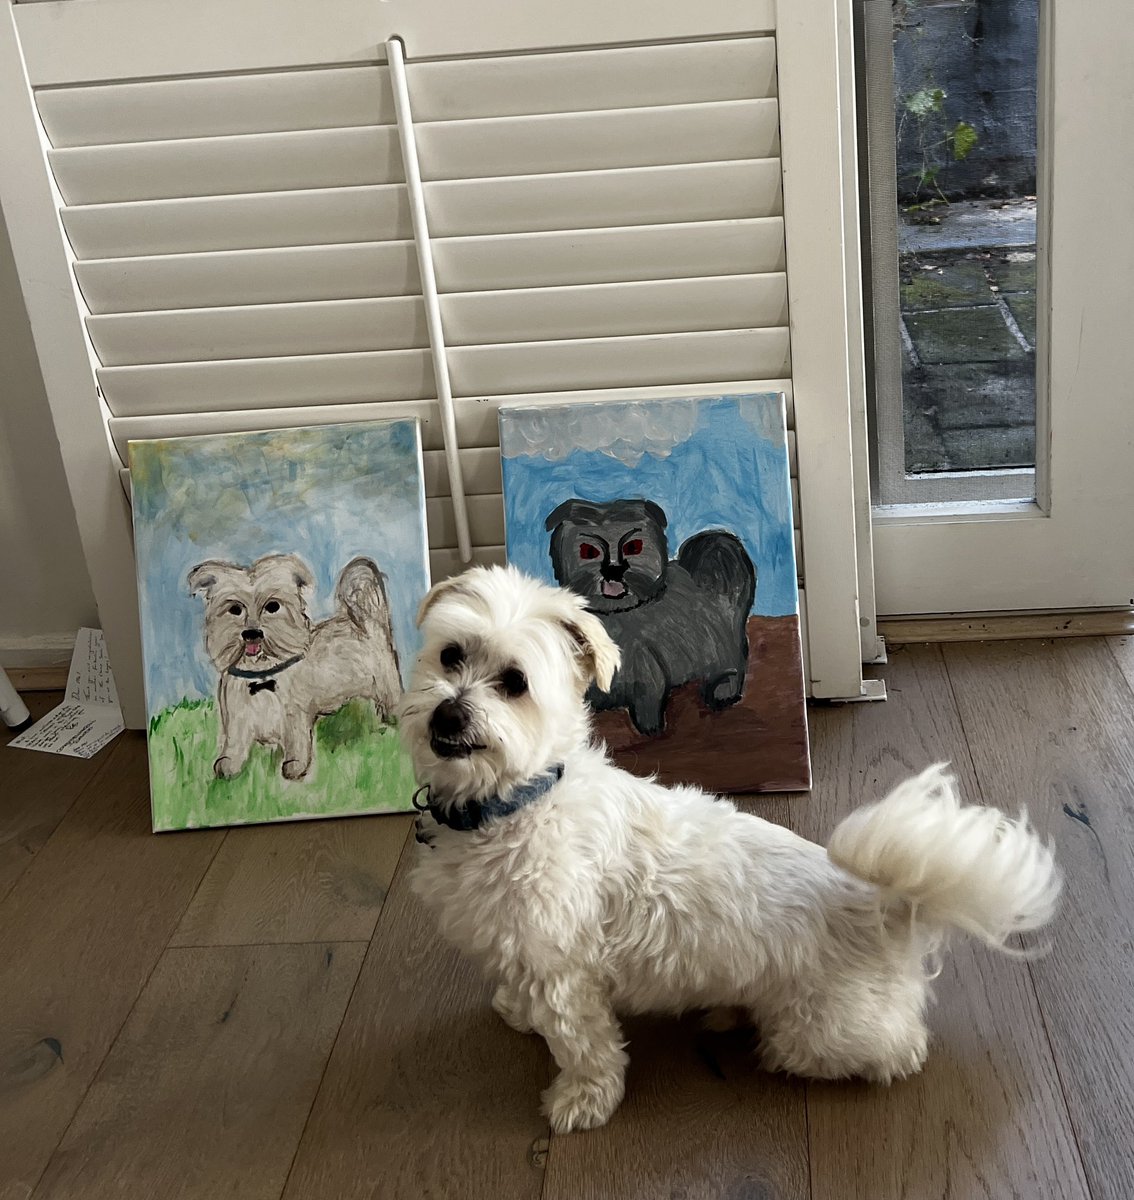 We painted our dog at a hens party and just brought them back to show him. I think he likes it.